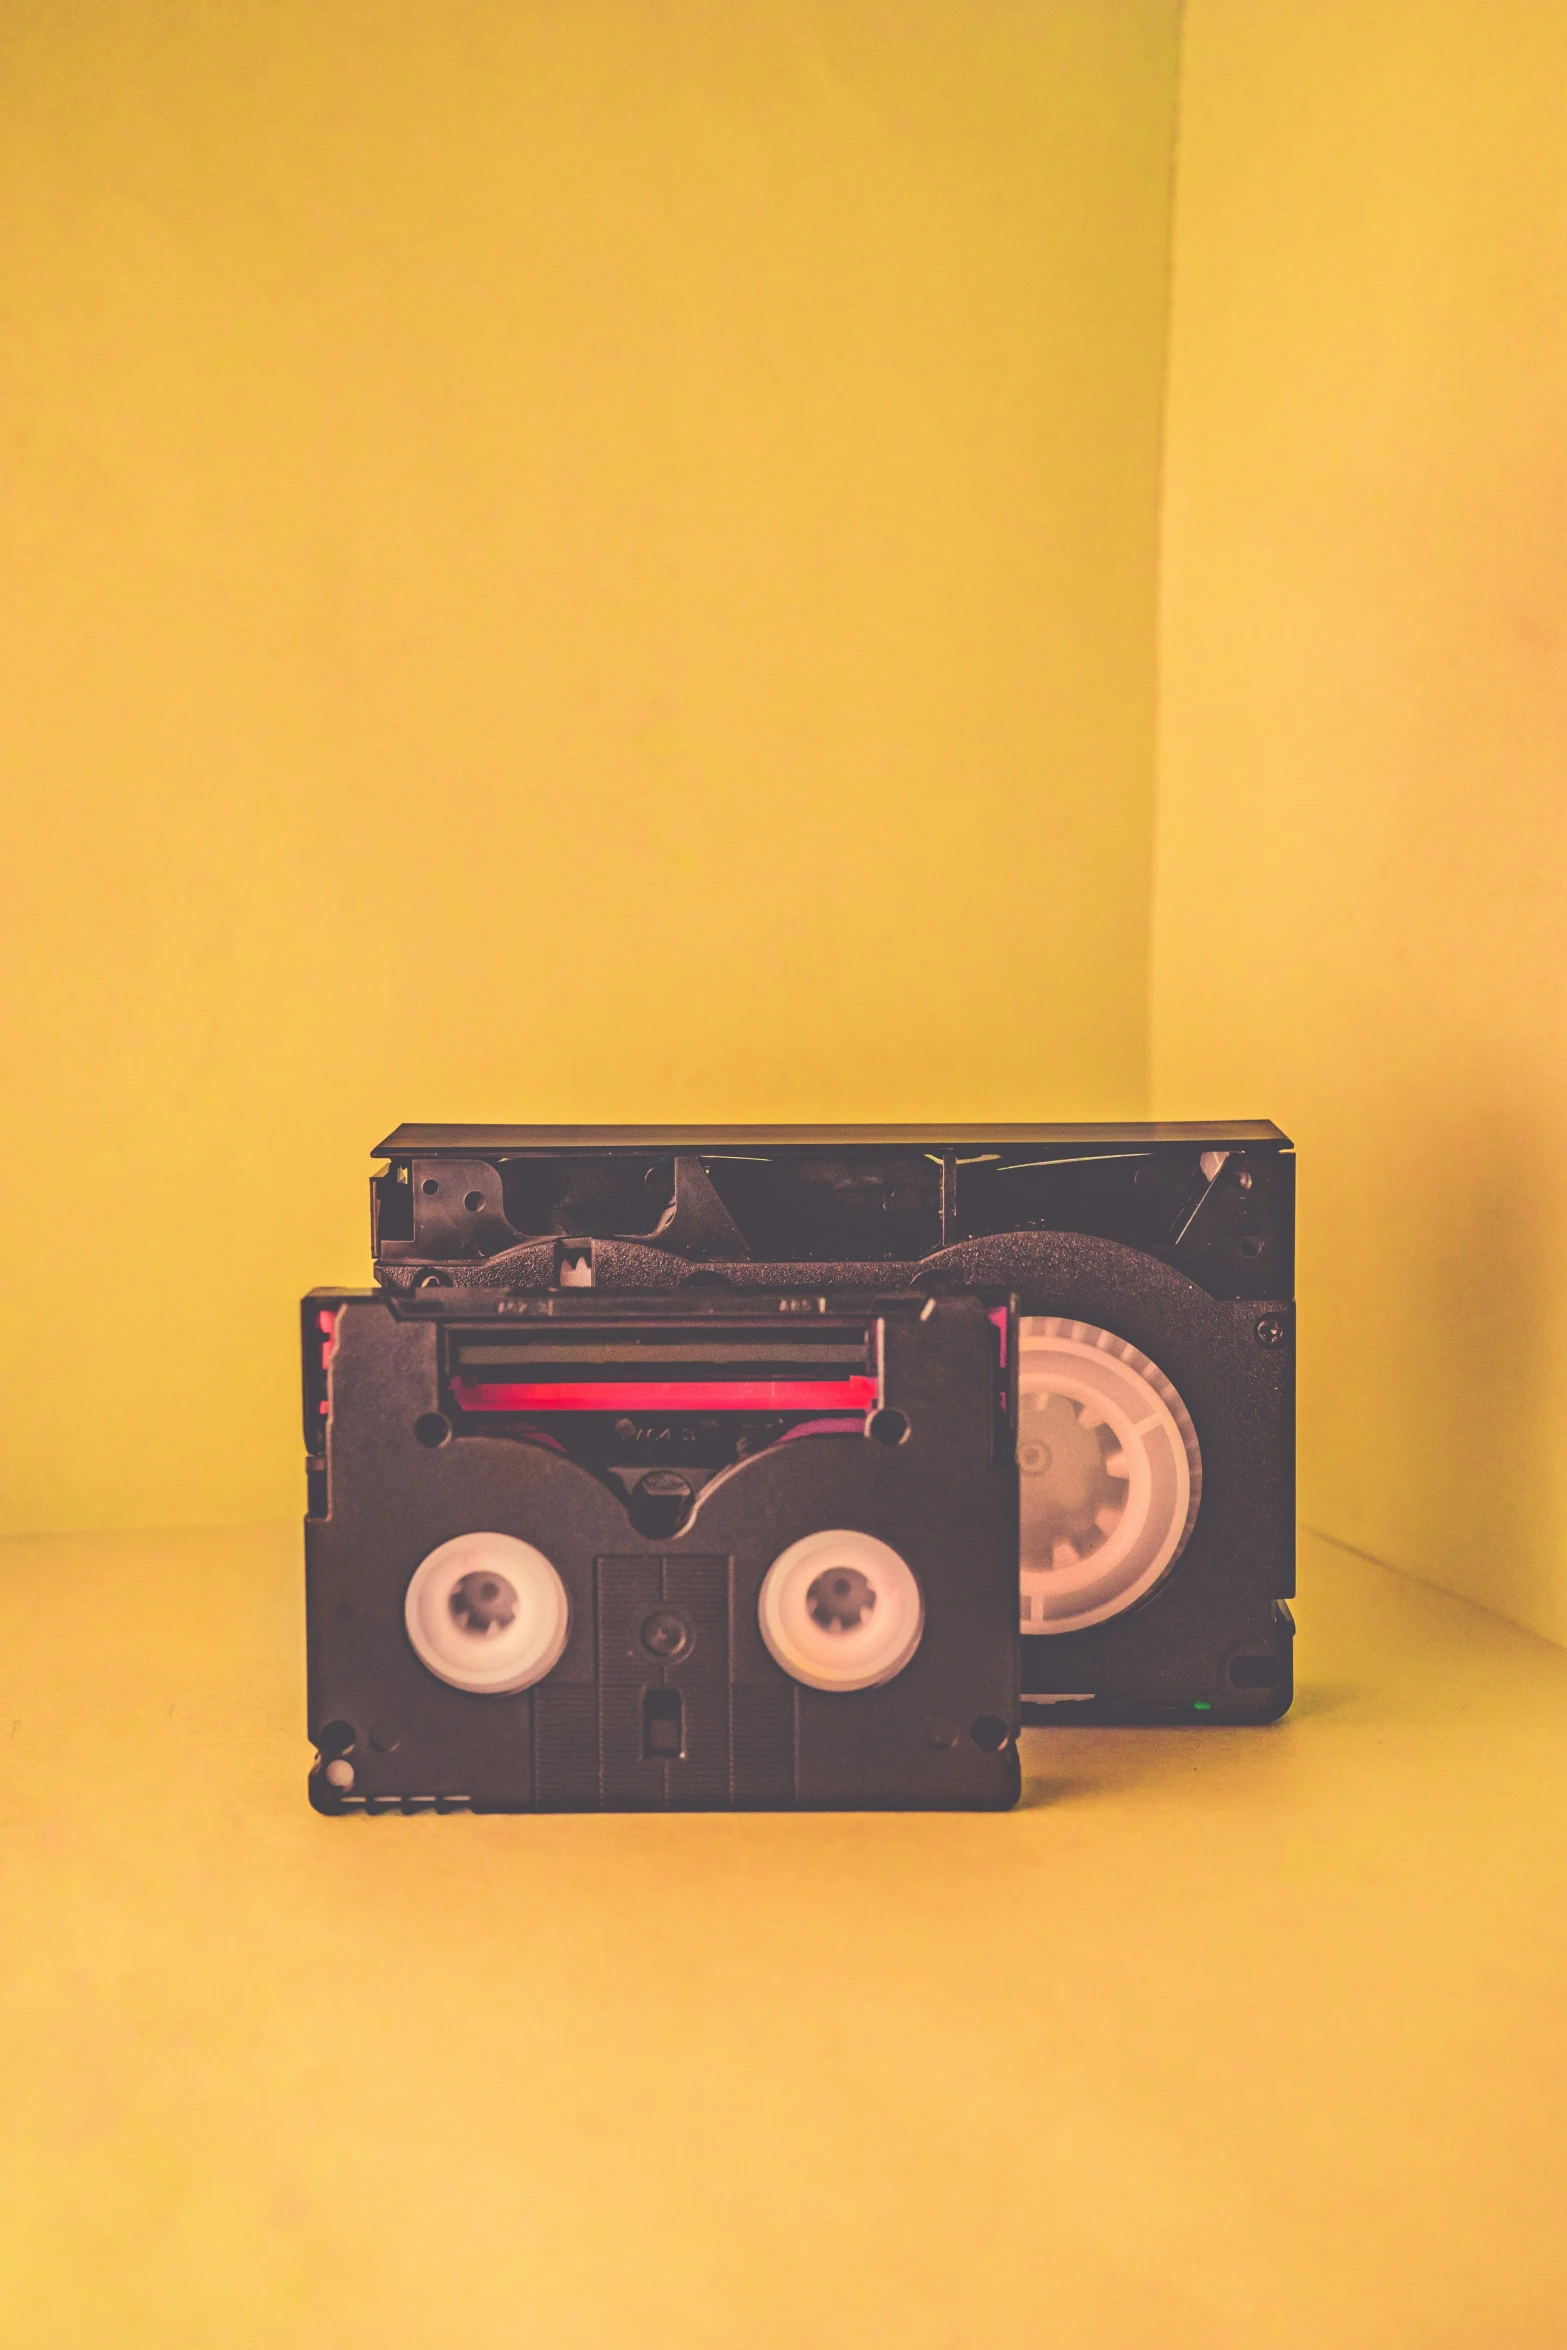 an old fashioned portable radio on yellow background